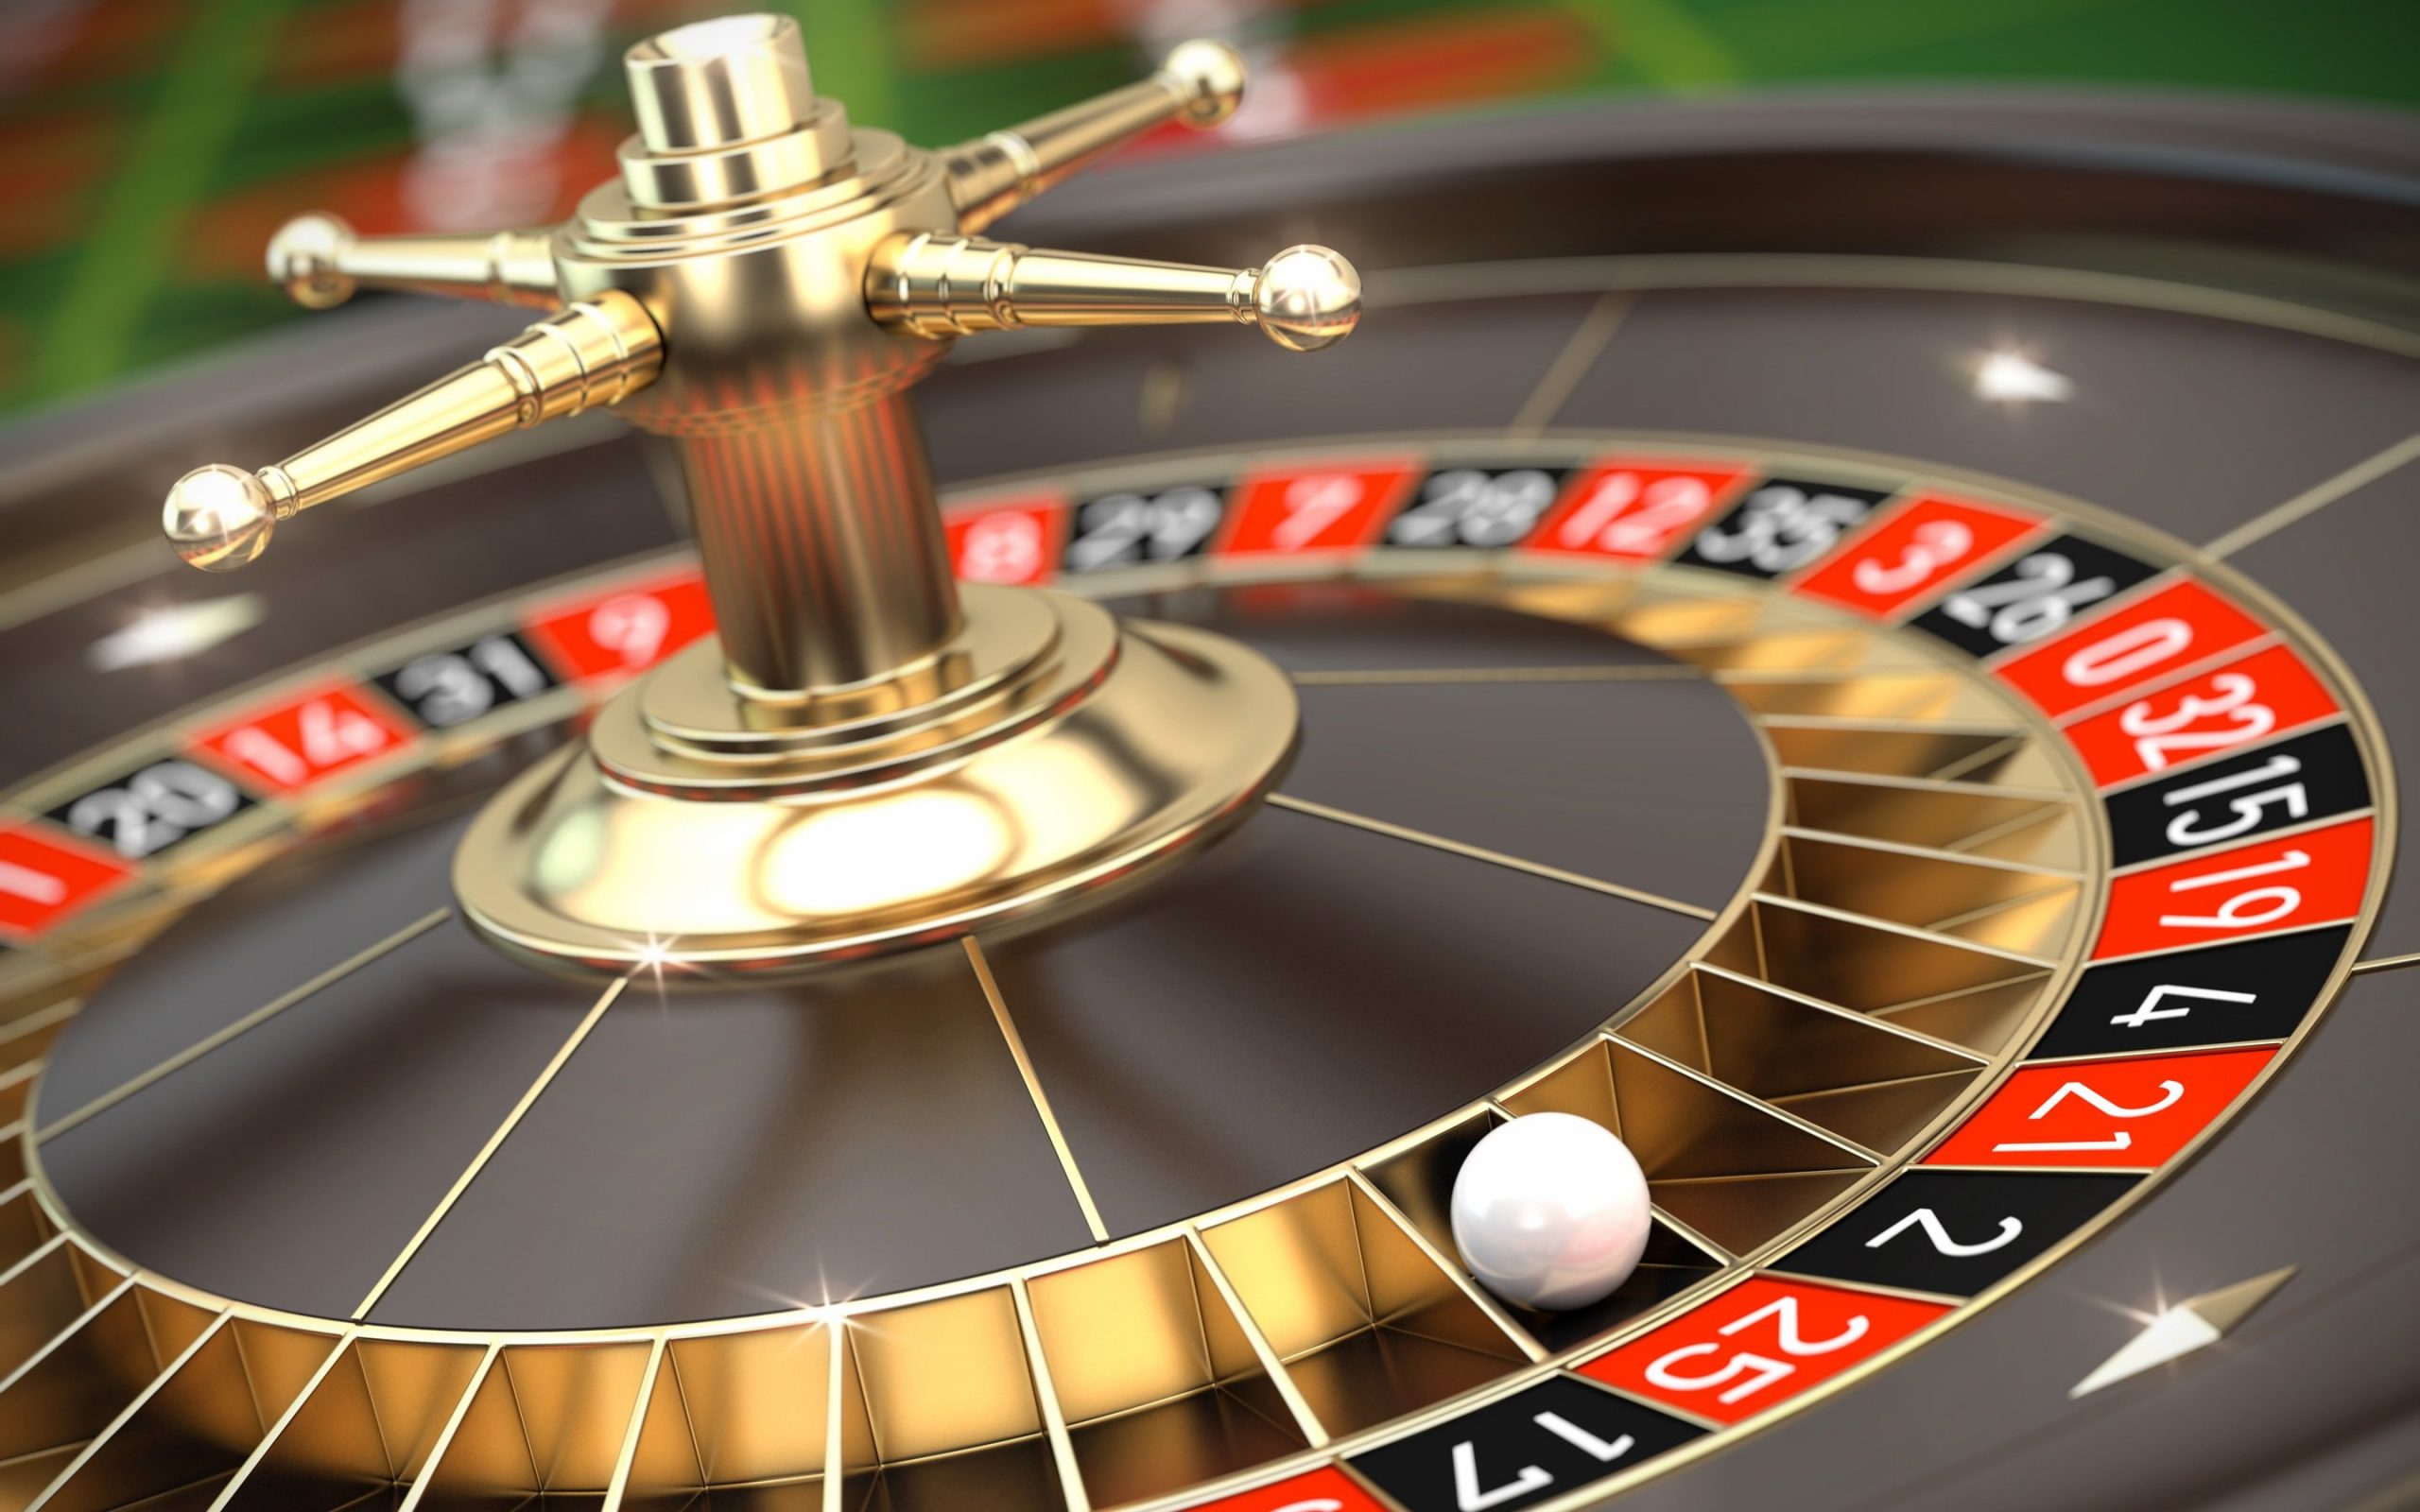 Serve our hunger for the game titles with a variety: Malaysia online casino